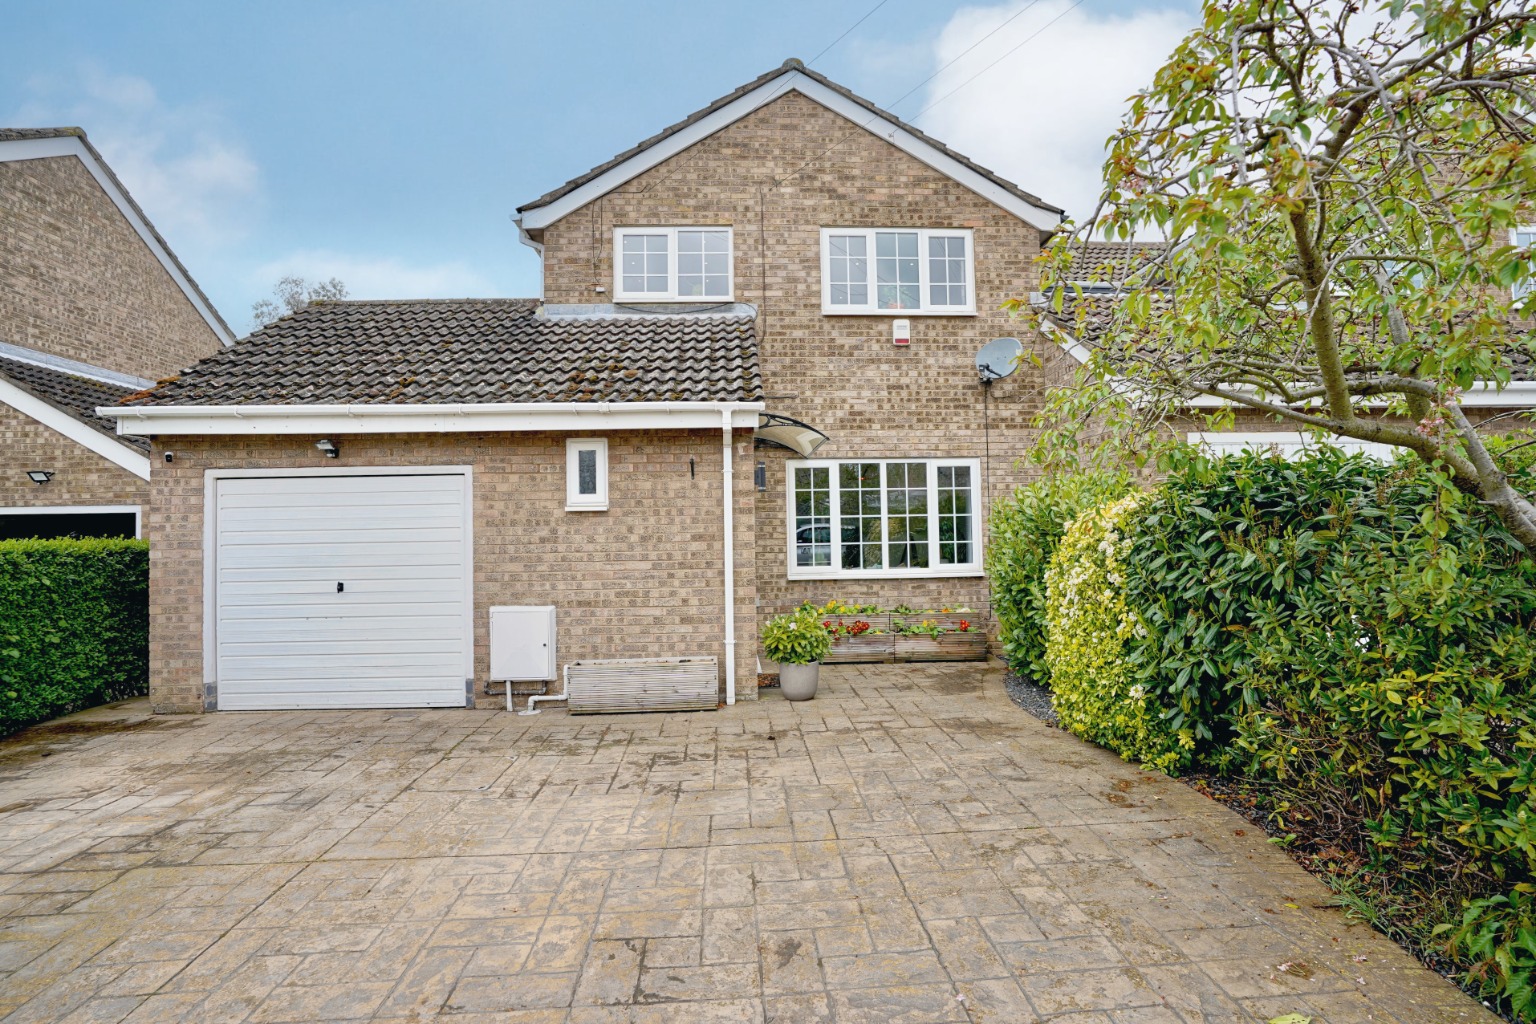 4 bed detached house for sale in Staughton Place, St Neots  - Property Image 1